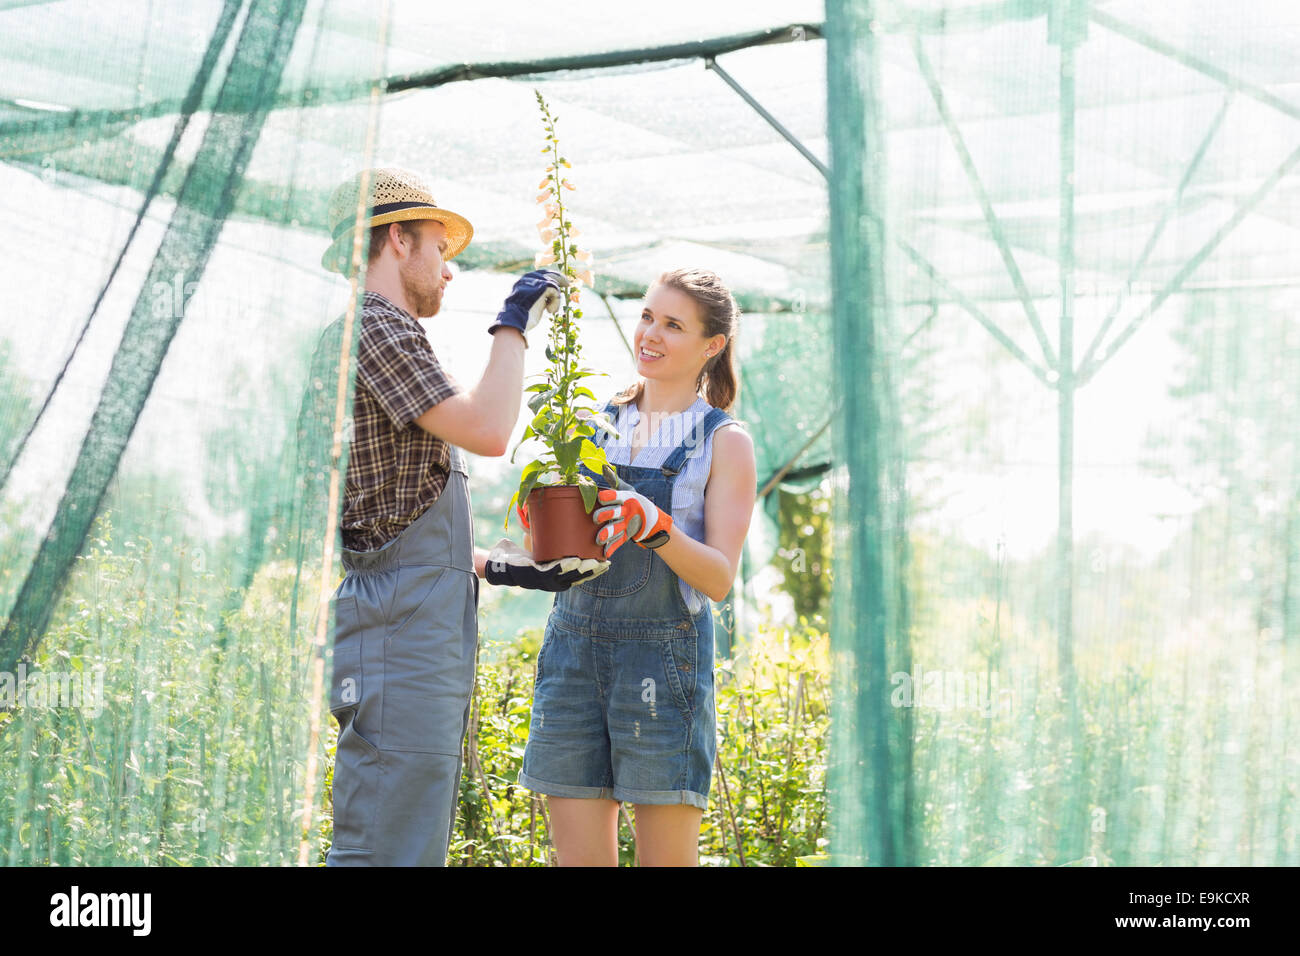 Gardeners discussing over potted plant at greenhouse Stock Photo